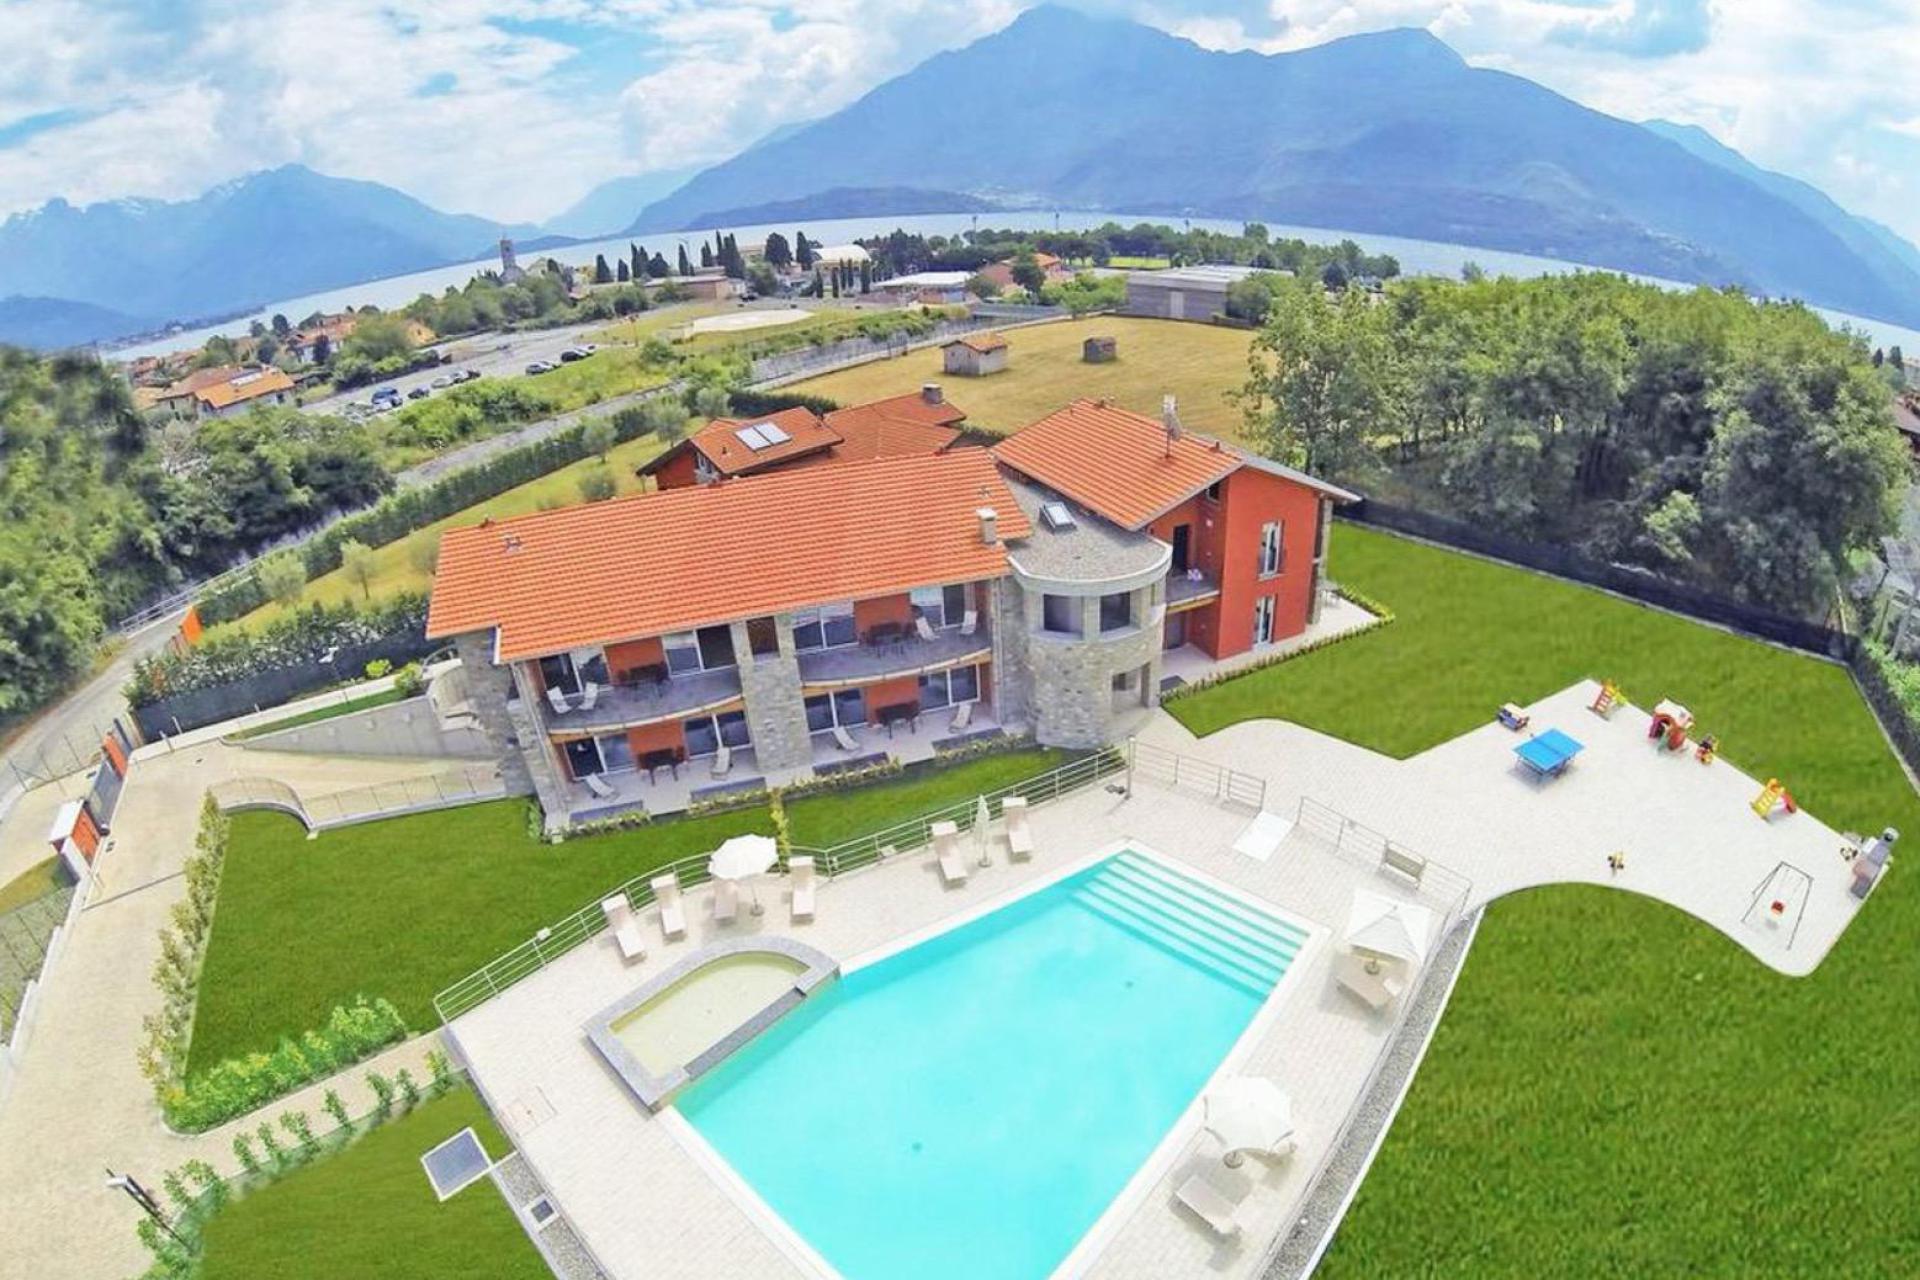 Child-friendly residence just 400 meters from the lake